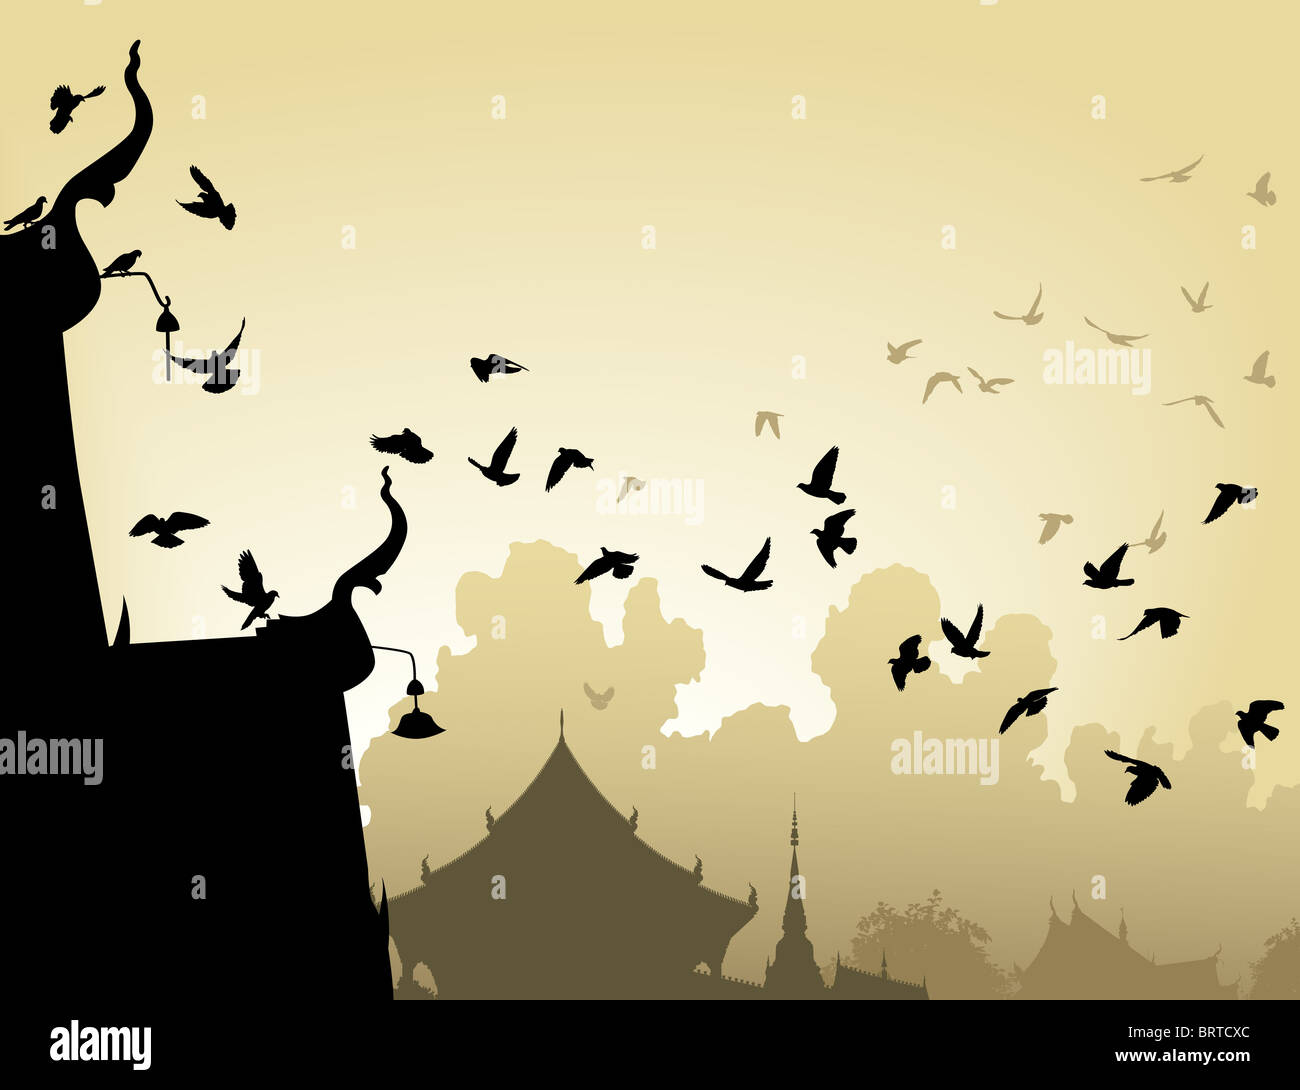 Illustration of pigeons flying to a Buddhist temple roof Stock Photo